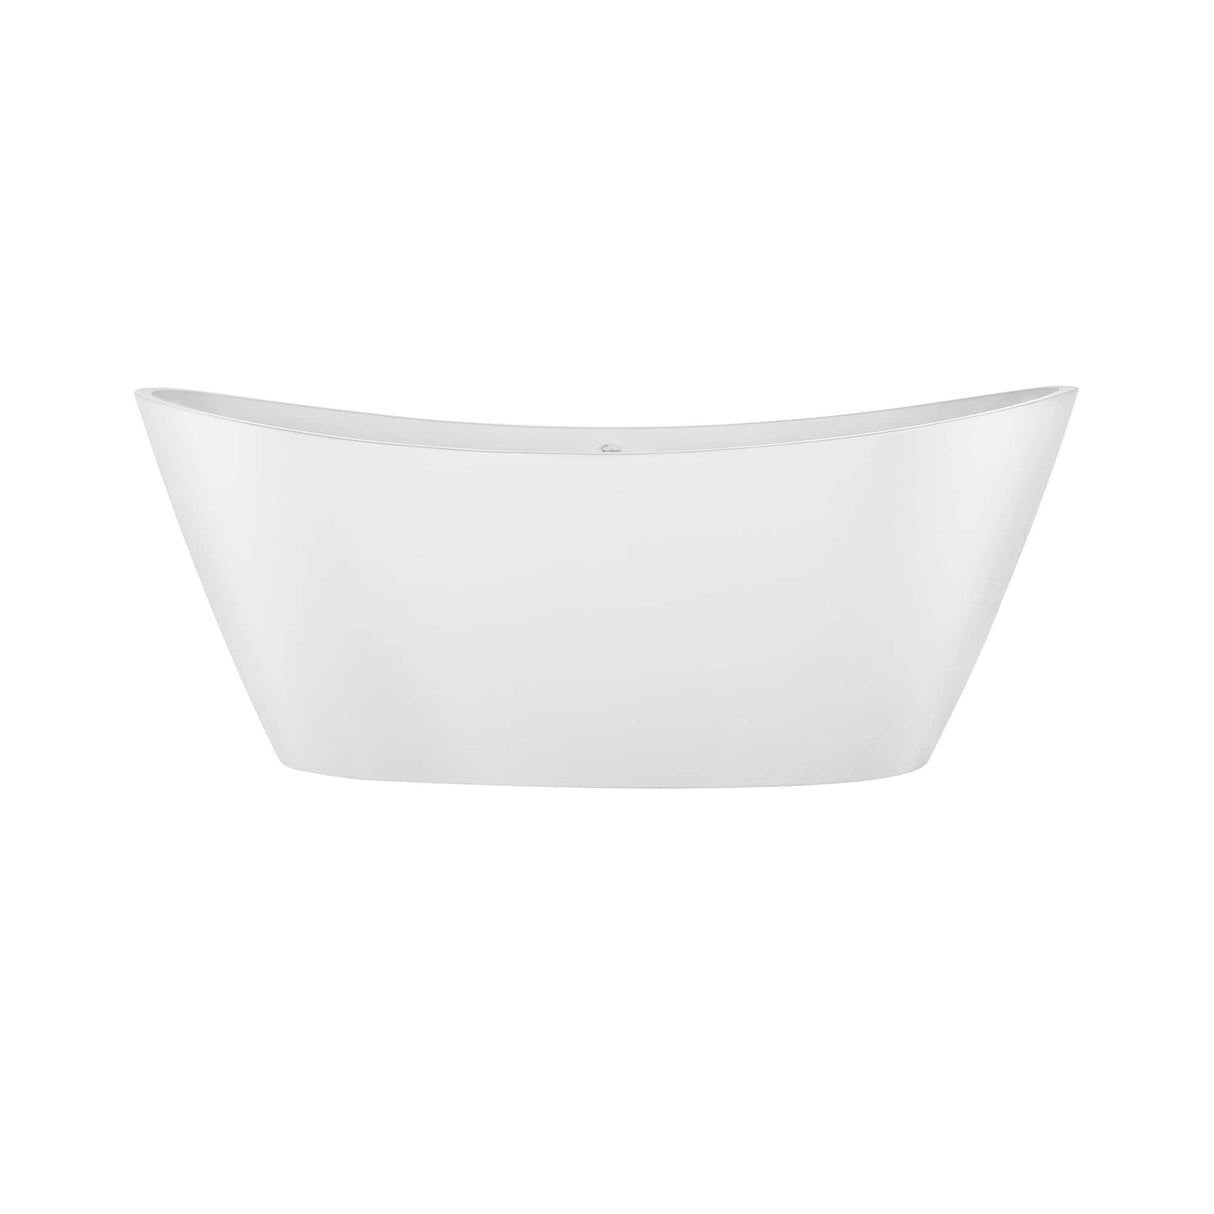 Empava-59FT1518LED freestanding acrylic soaking oval modern white bathtub with LED Lights front view